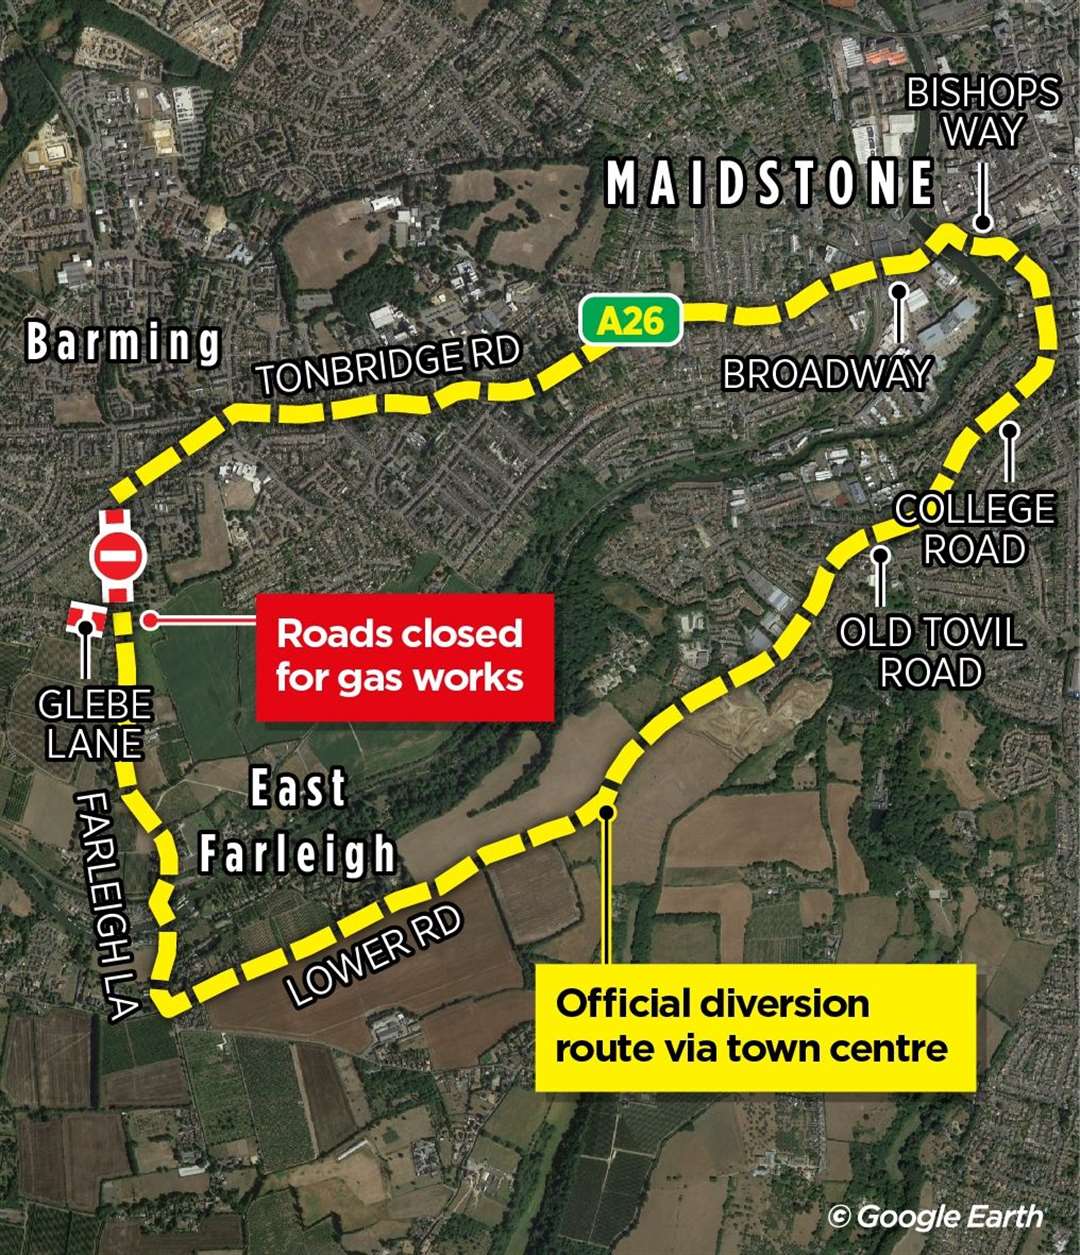 Motorists will be diverted through Maidstone town centre